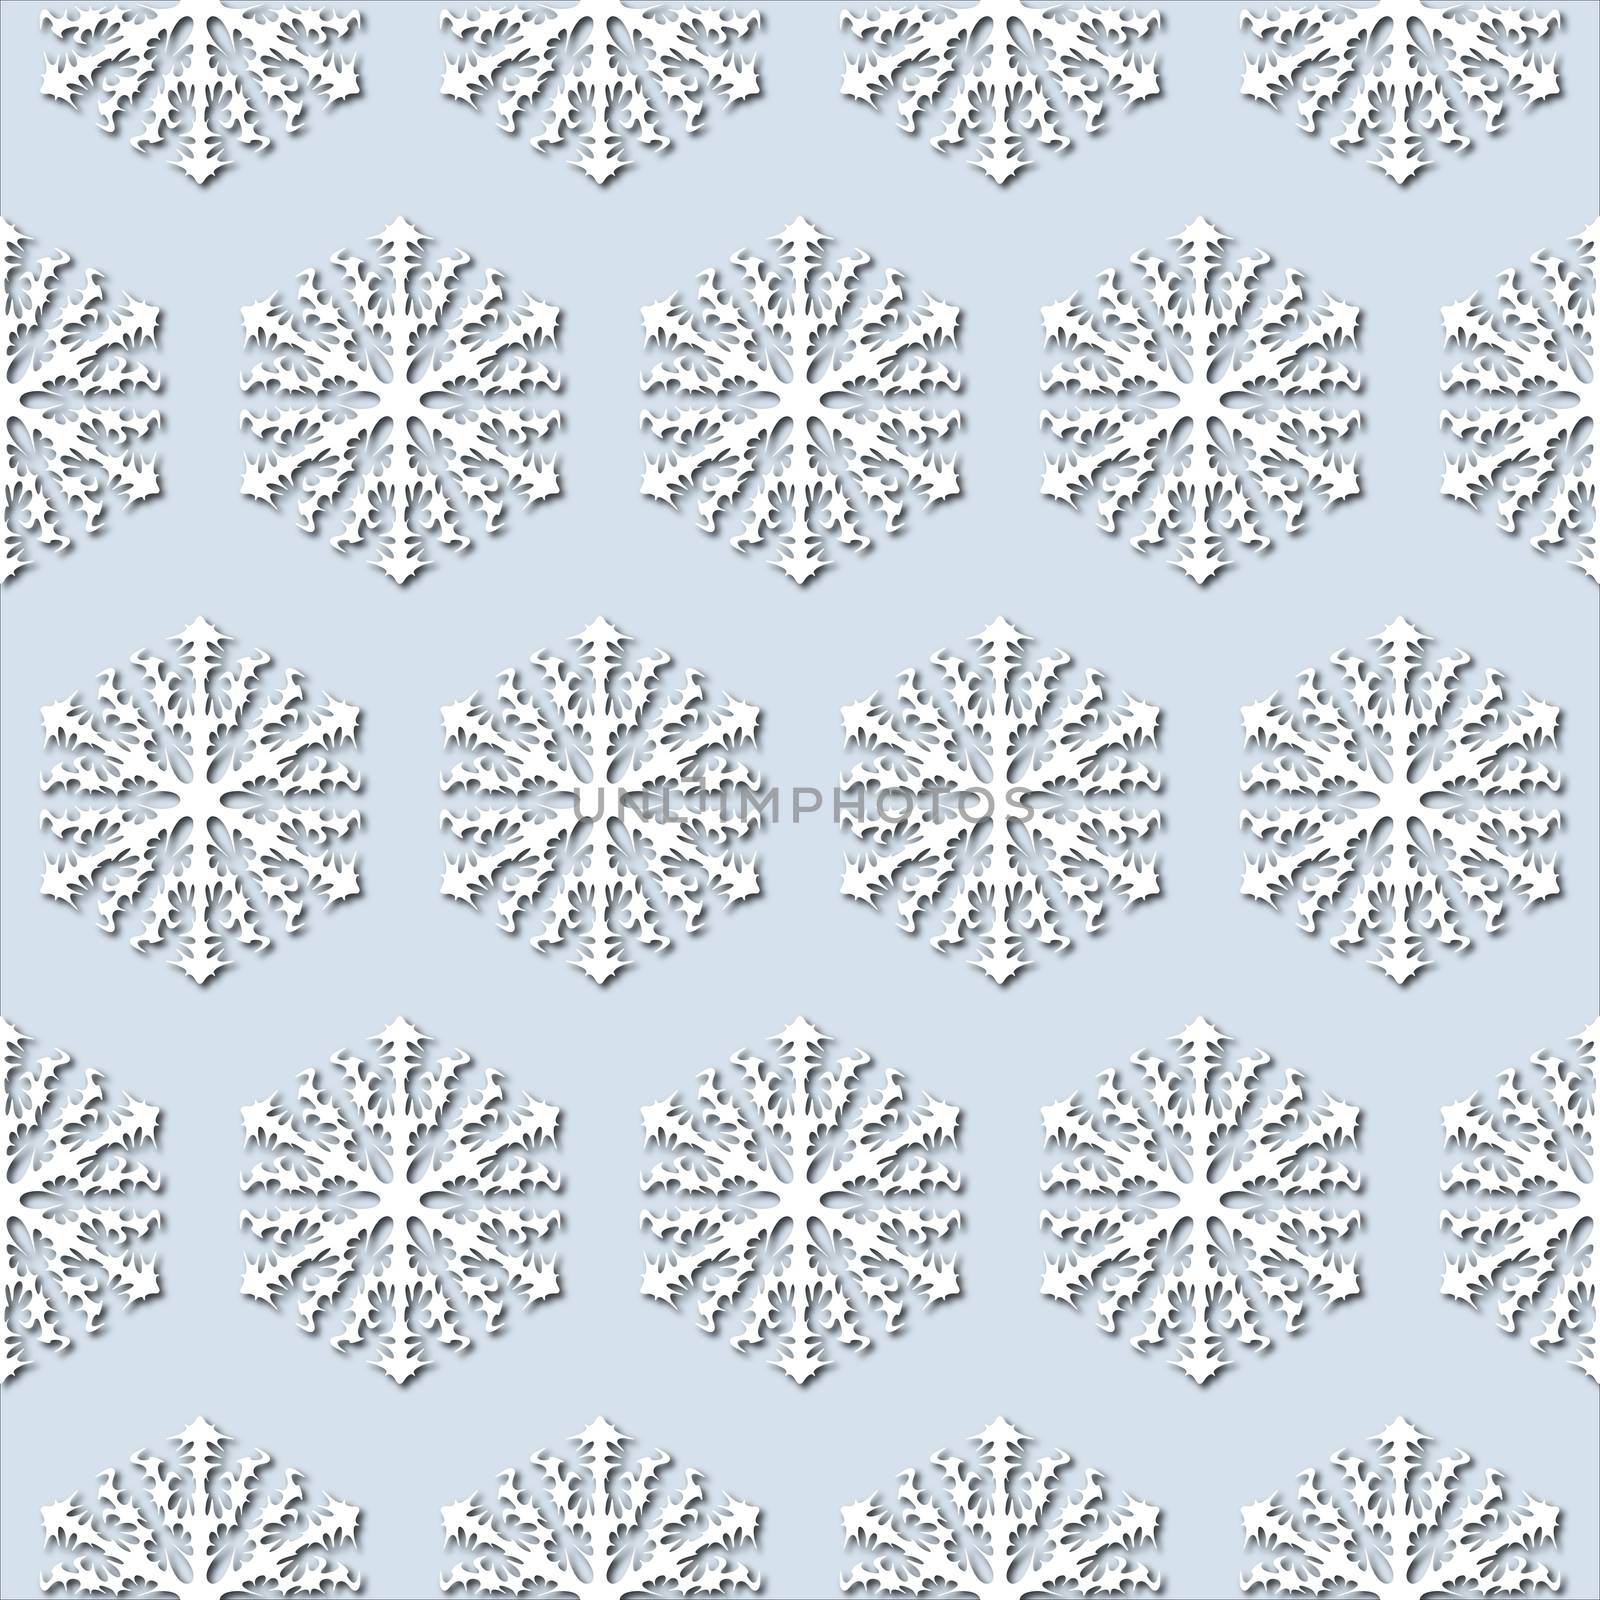 White snowflakes on pale blue background, seamless pattern. Paper cut style with drop shadows and highlights.